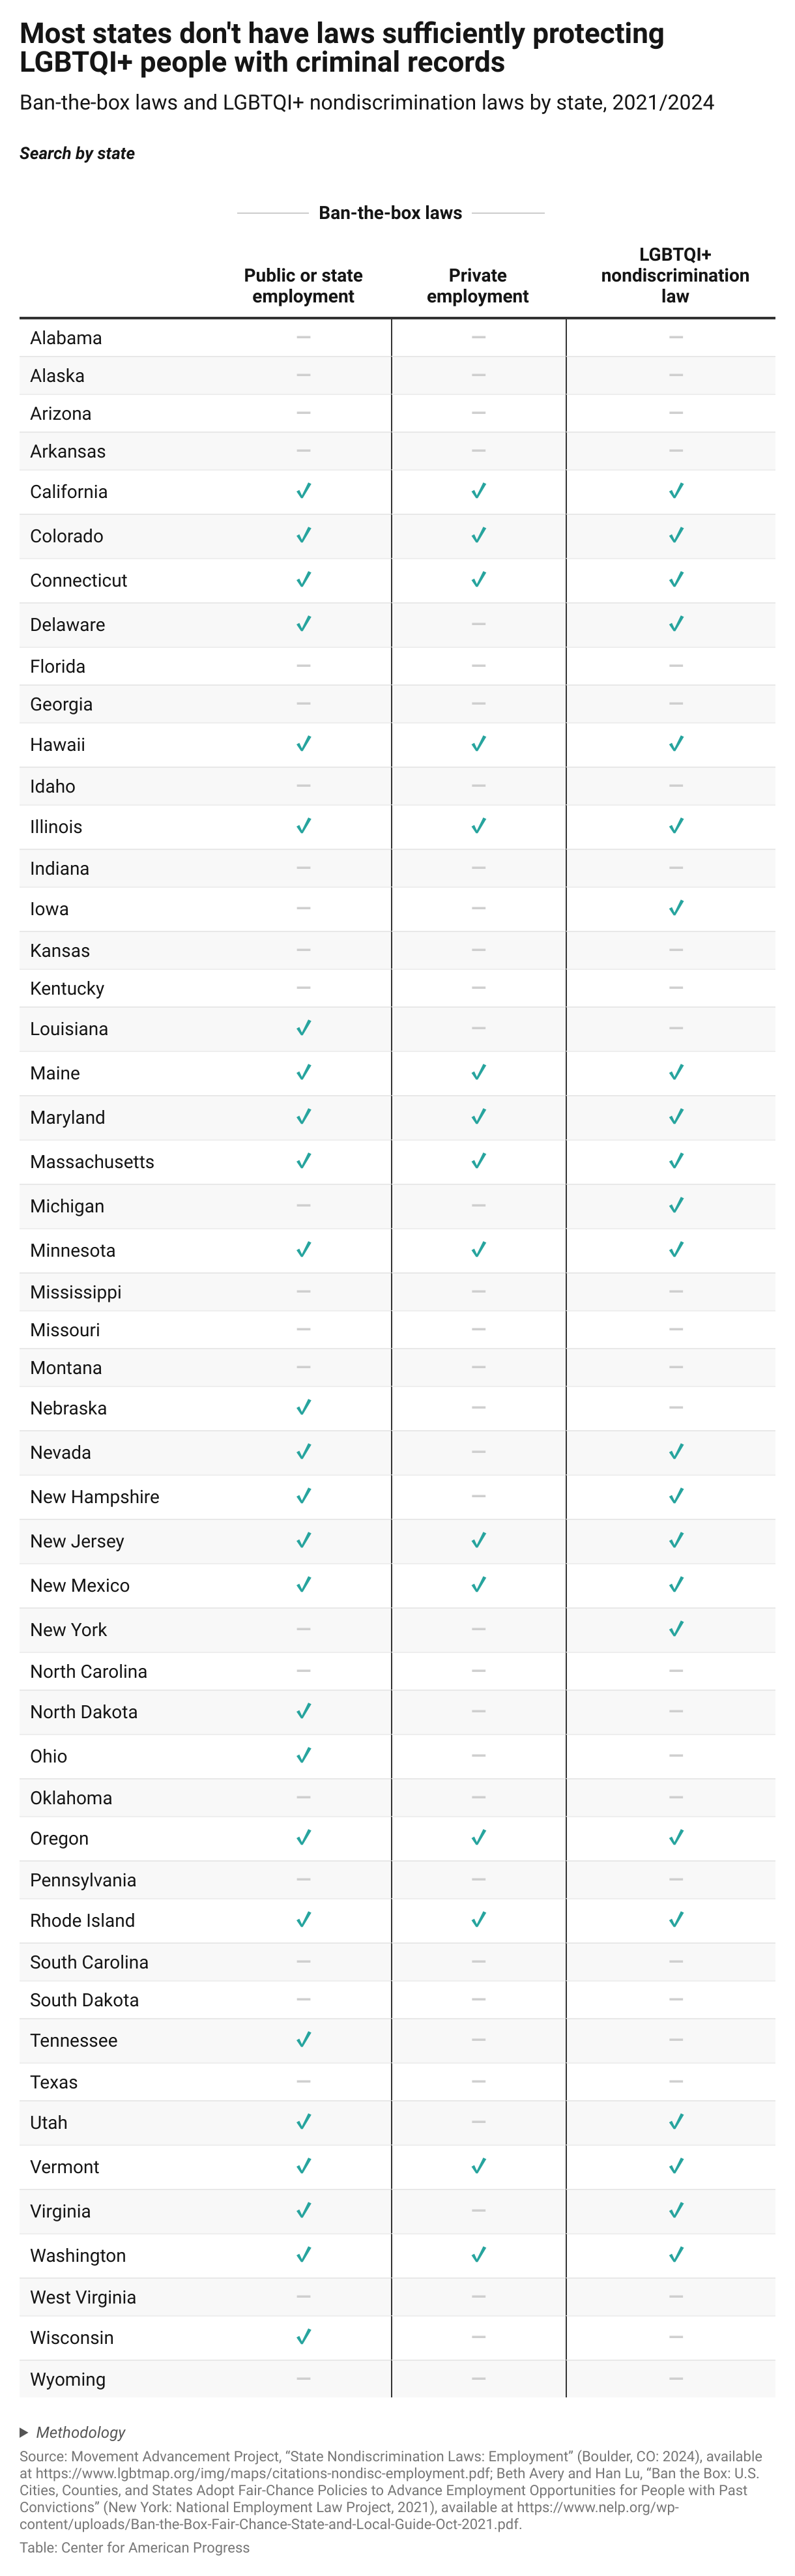 Table showing states with ban-the-box laws and LGBTQI+ nondiscrimination laws, demonstrating that only 15 states provide the strongest protections of both policies.